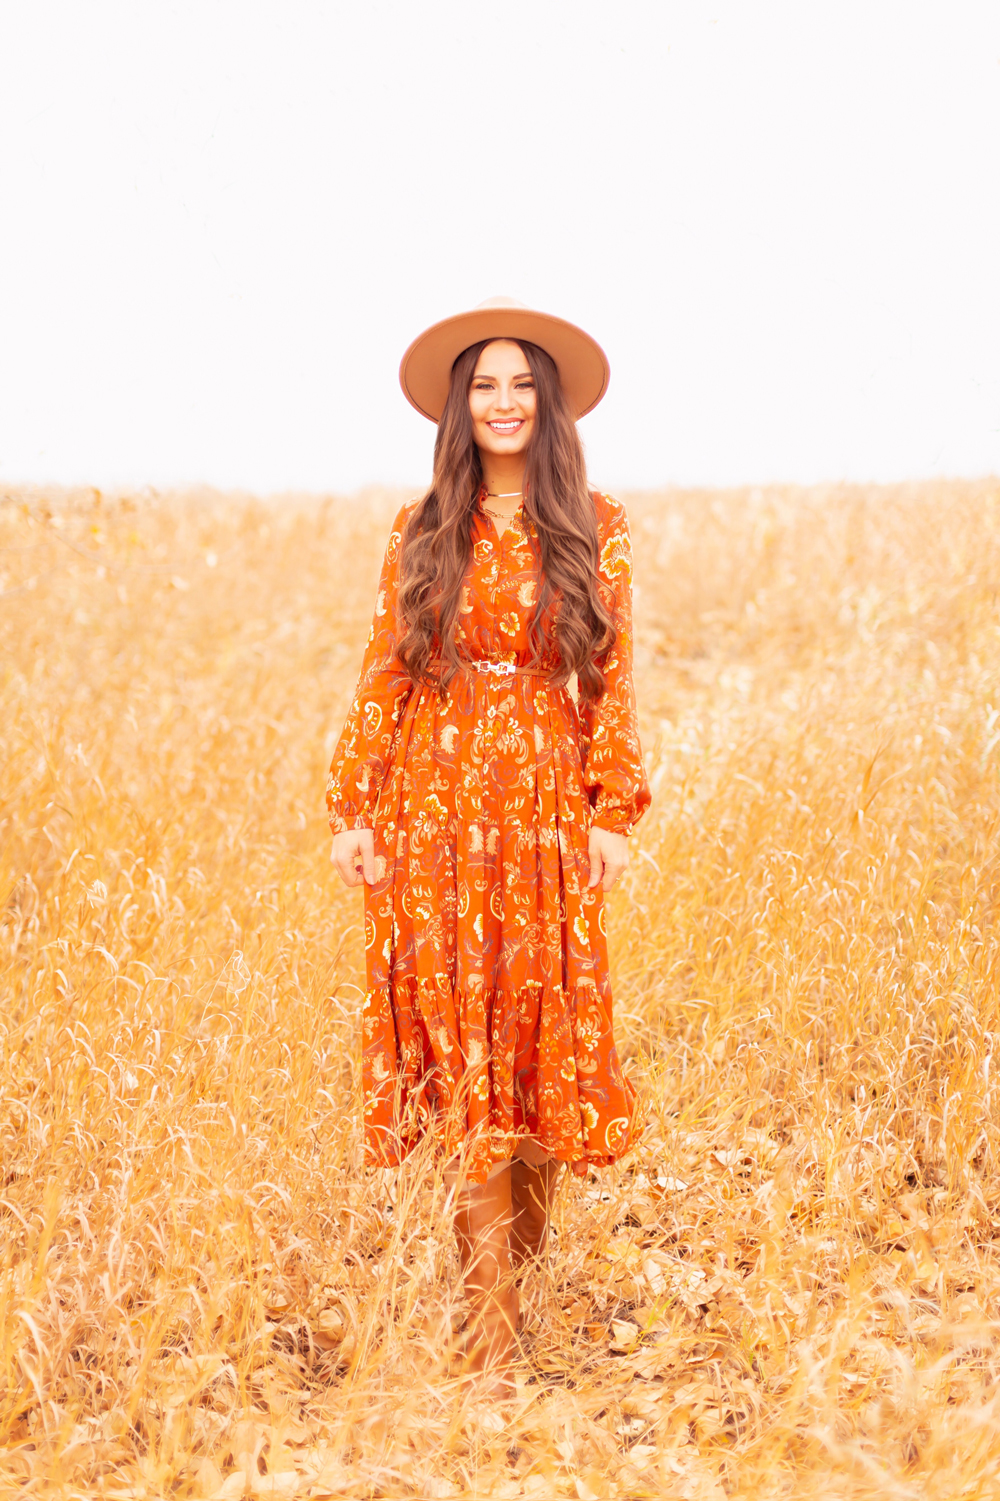 6 Luxe Bohemian Fall Outfits | Thanksgiving Chic | Smiling brunette woman wearing an orange paisley midi dress, brown Pink Martini Stockport Vest, a slim cognac leather corset, a vintage leather hand tooled bag and Vince Camuto Cognac Senimda Mid Calf Boot amoungst golden grasses | Boho Fall 2022 Outfit Ideas | Classic Fall Outfit Formulas | Feminine Bohemian Style | Polished Bohemian Style | Elegant Bohemian Style | Bohemian Outfit Ideas | Calgary Alberta Fashion Blogger // JustineCelina.com